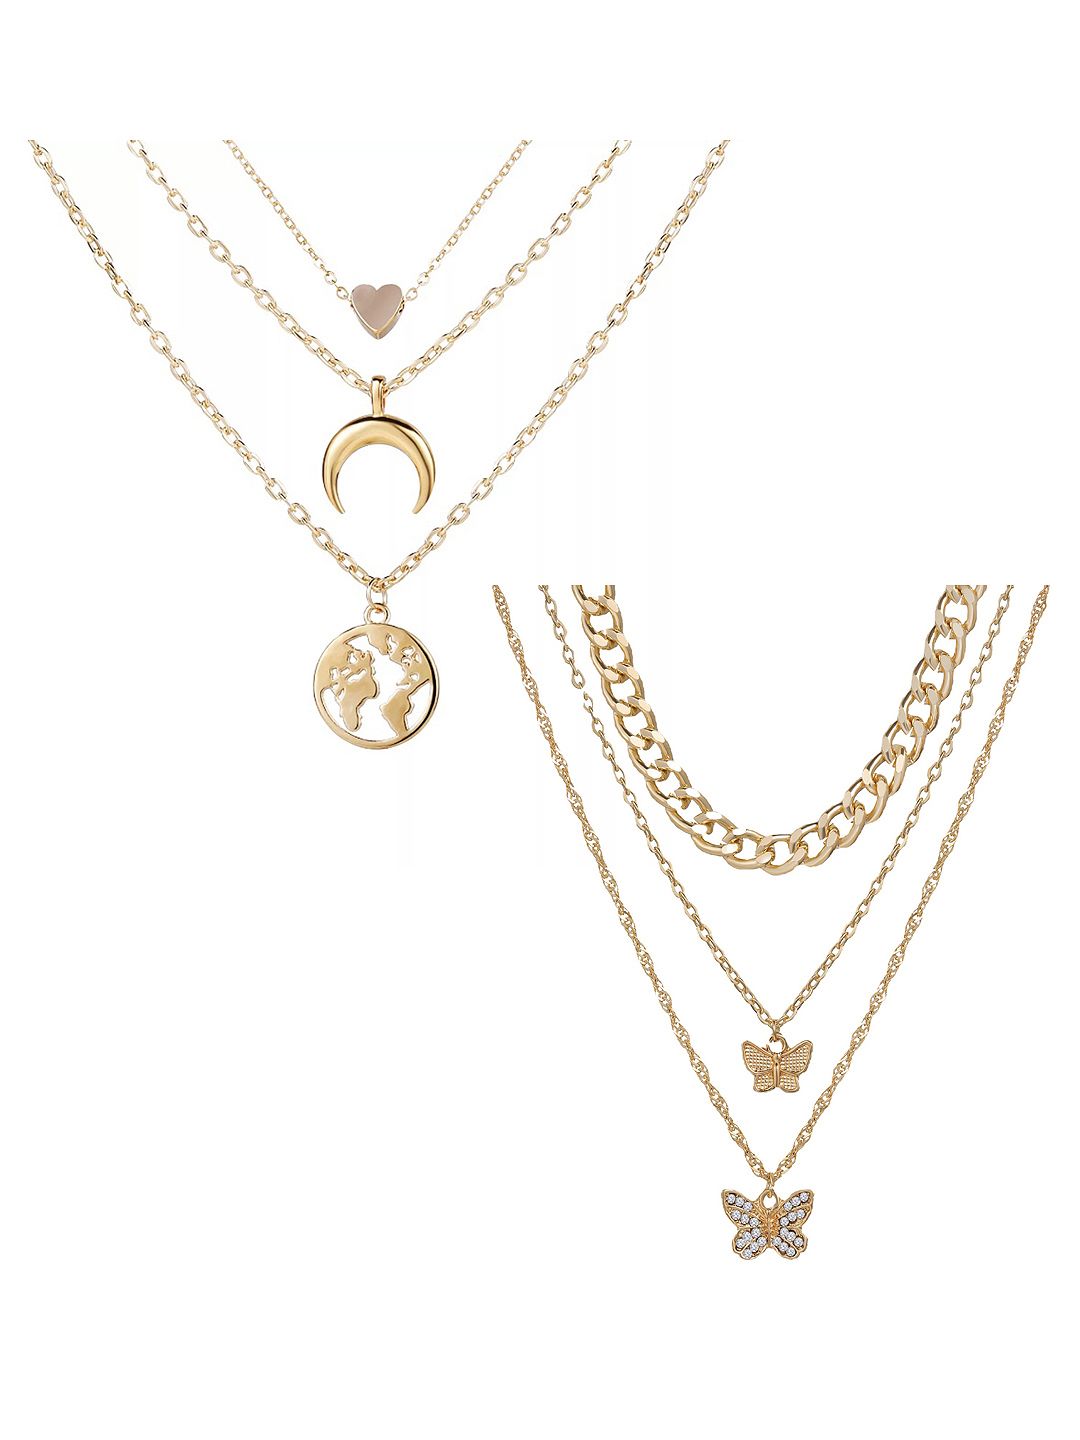 Vembley Pack of 2 Gold-Toned Gold-Plated Layered Necklace Price in India